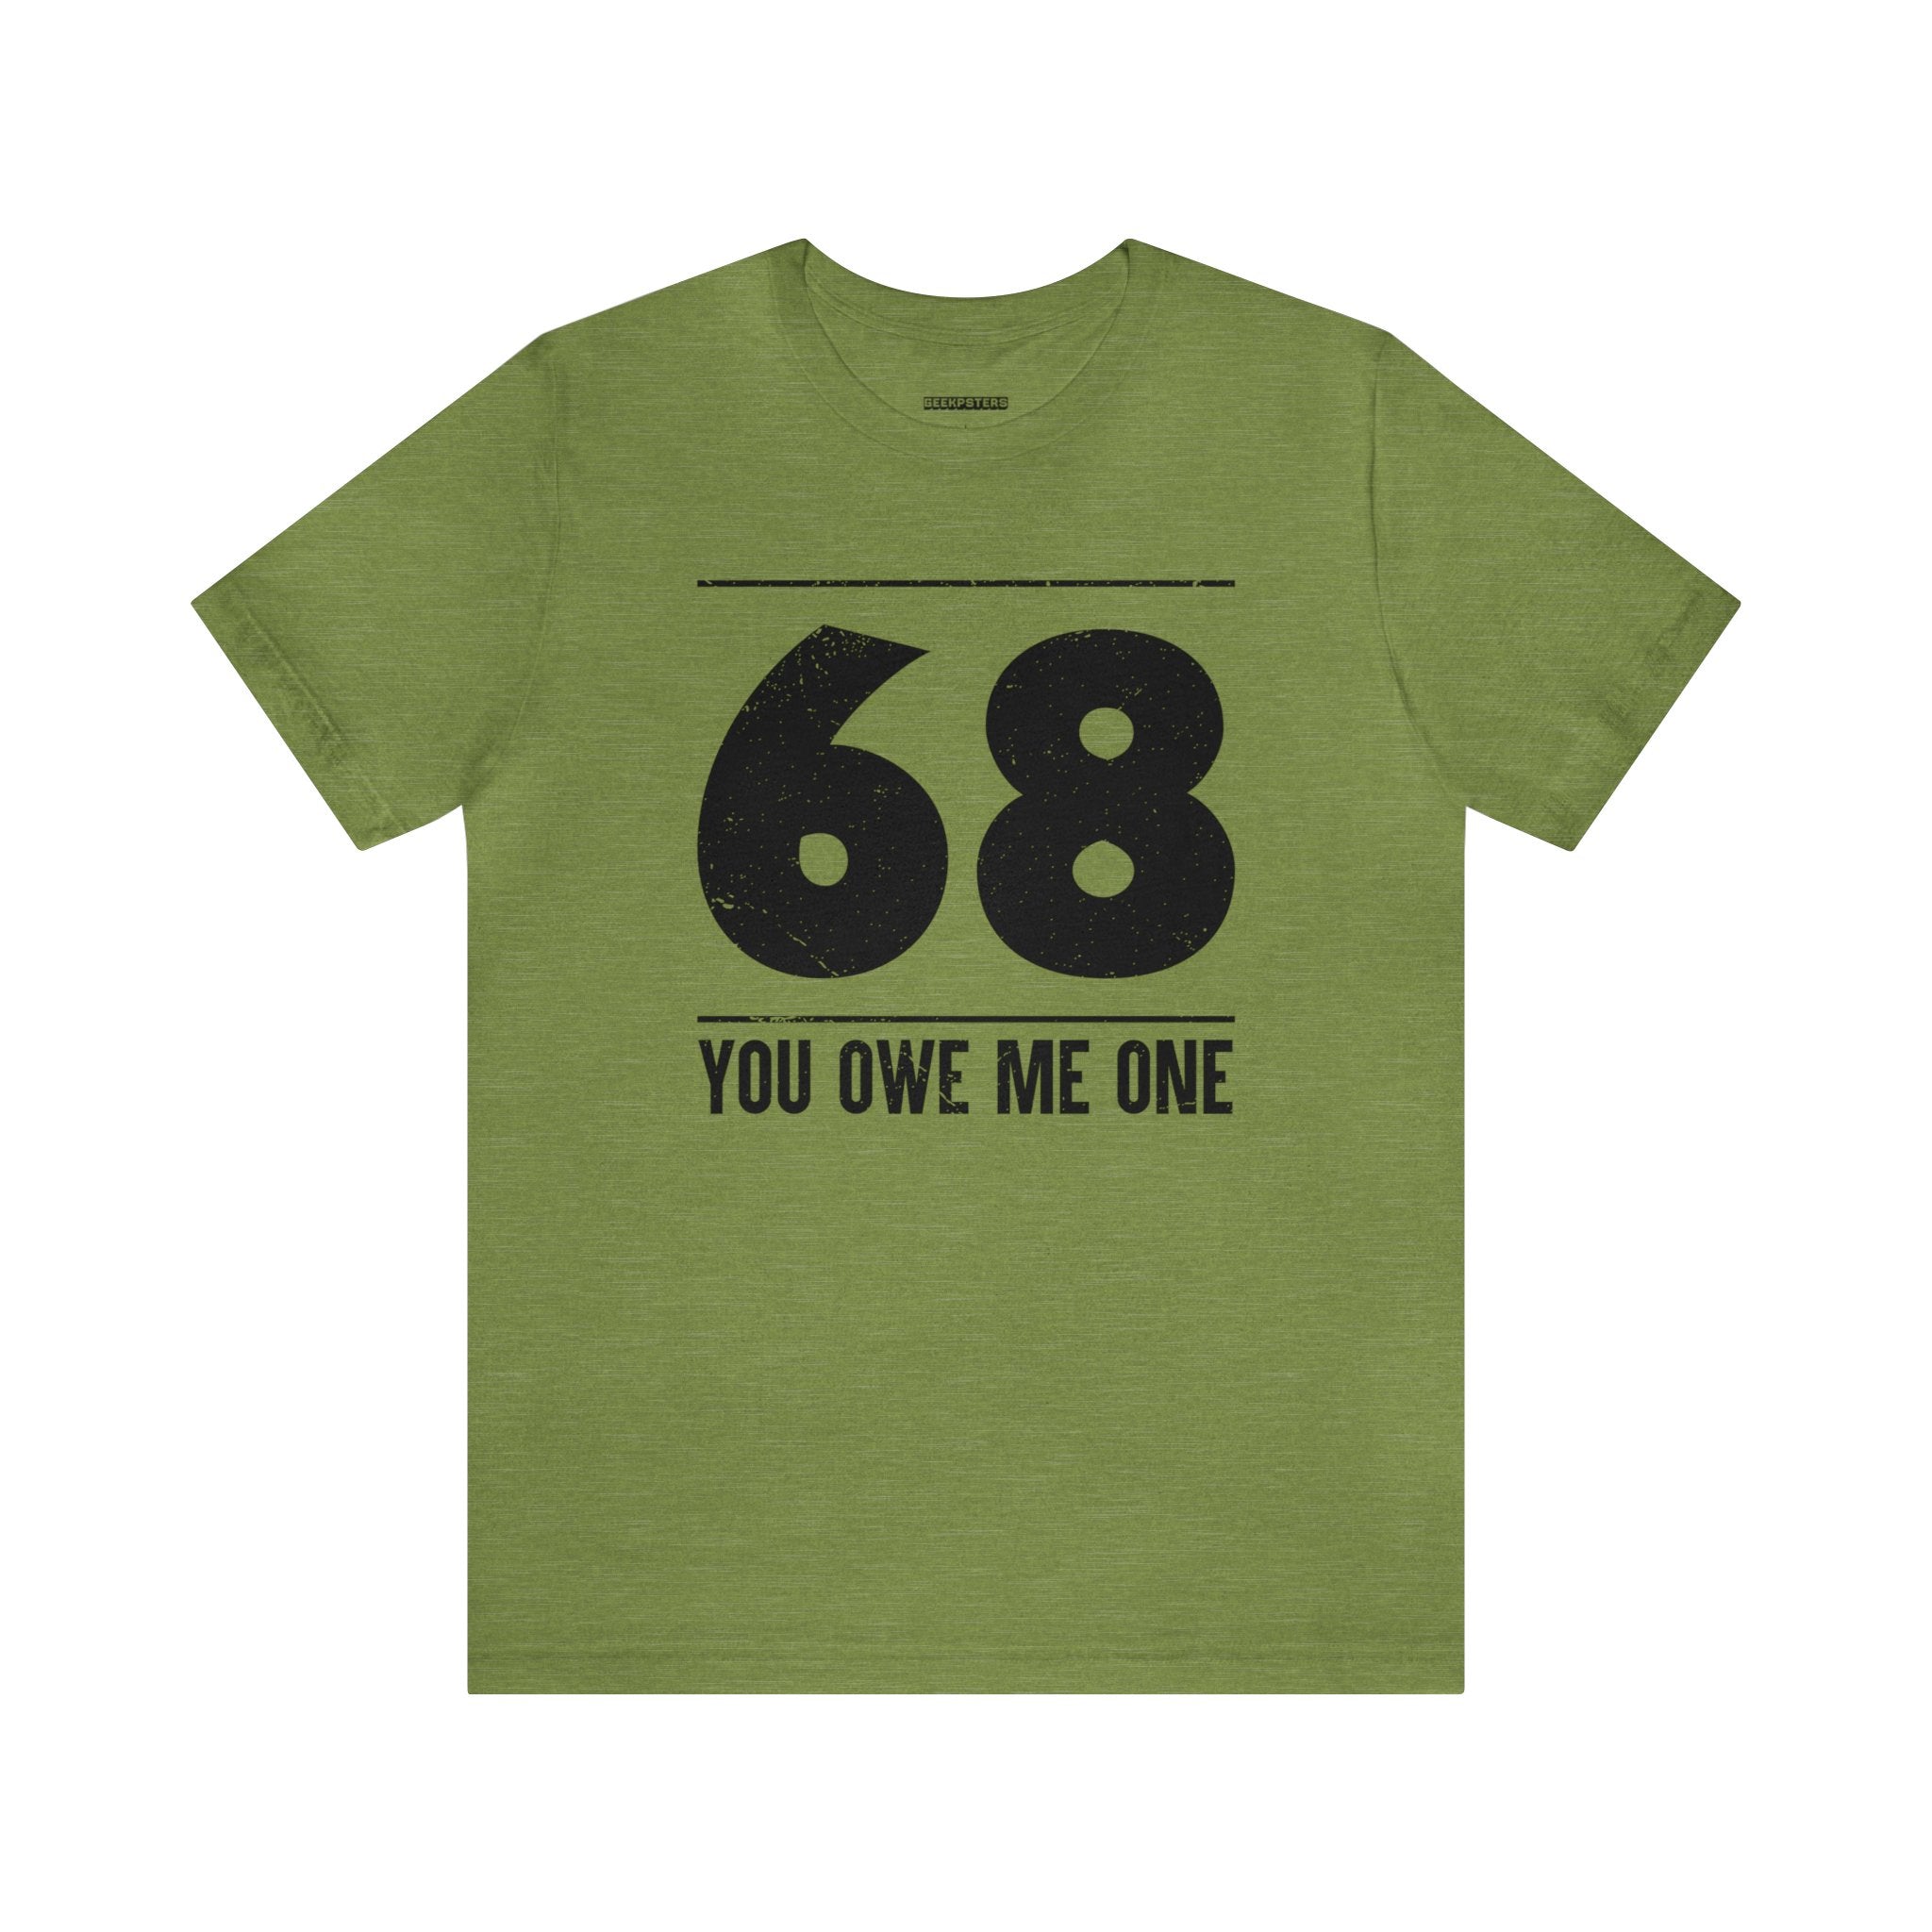 A geeky green t-shirt that says 68 You Owe Me One, a unique find.